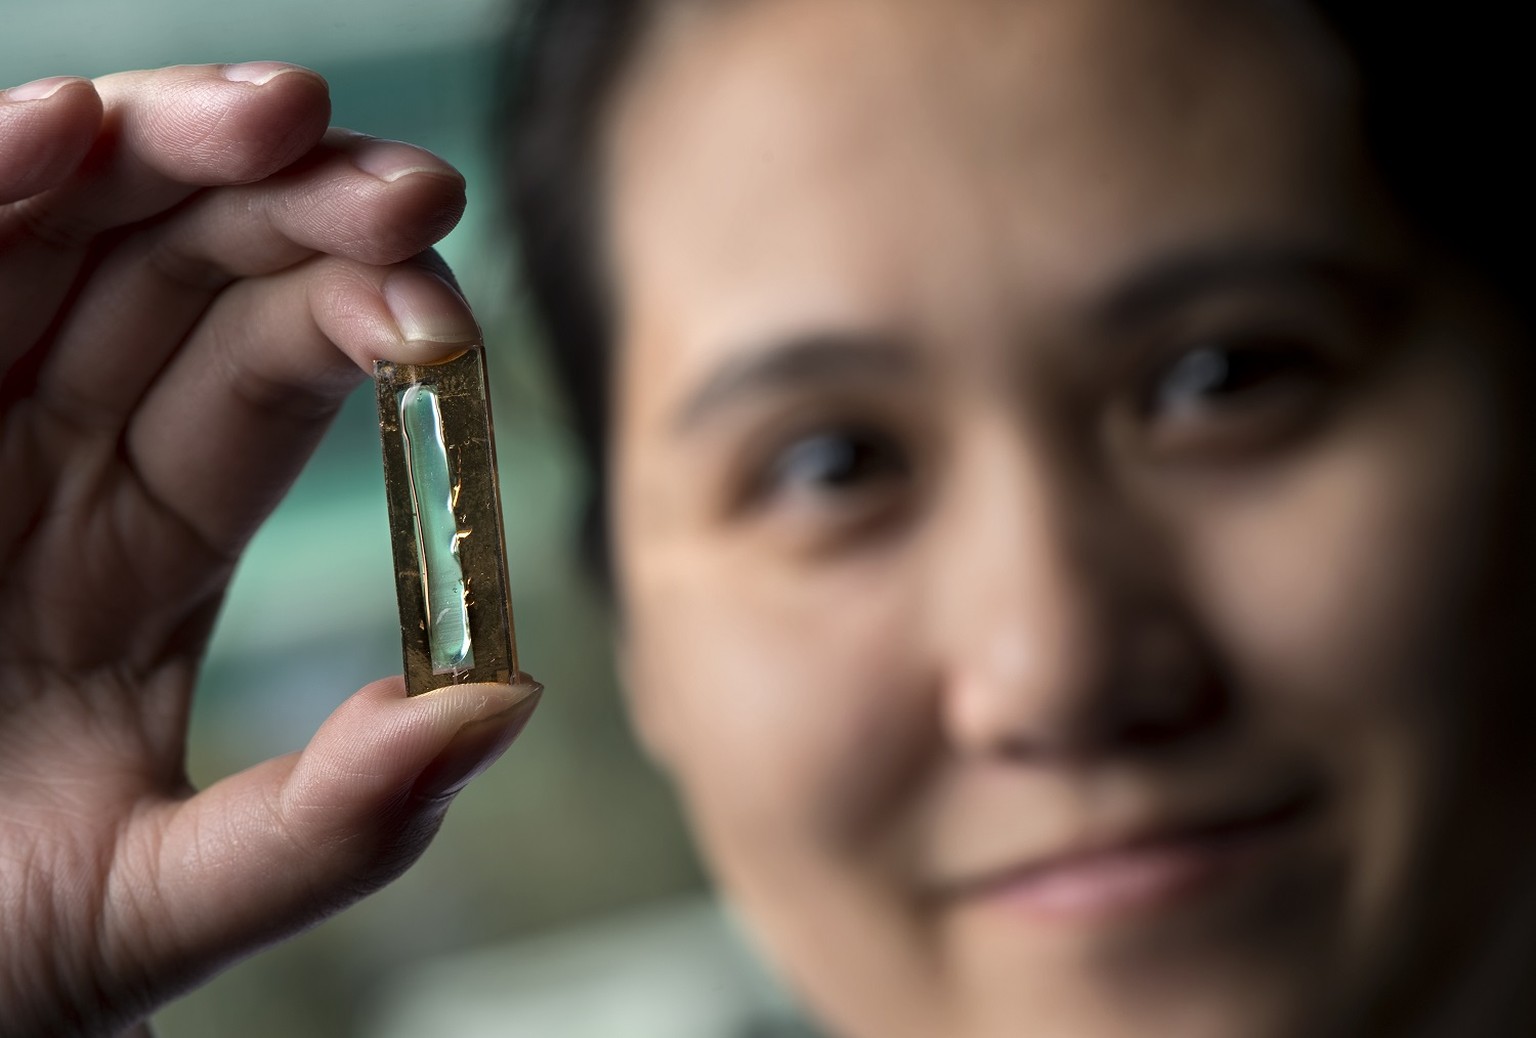 UCI chemist Reginald Penner and doctoral student Mya Le Thai, shown, have developed a nanowire-based battery technology that allows lithium ion batteries to be recharged hundreds of thousands of times ...